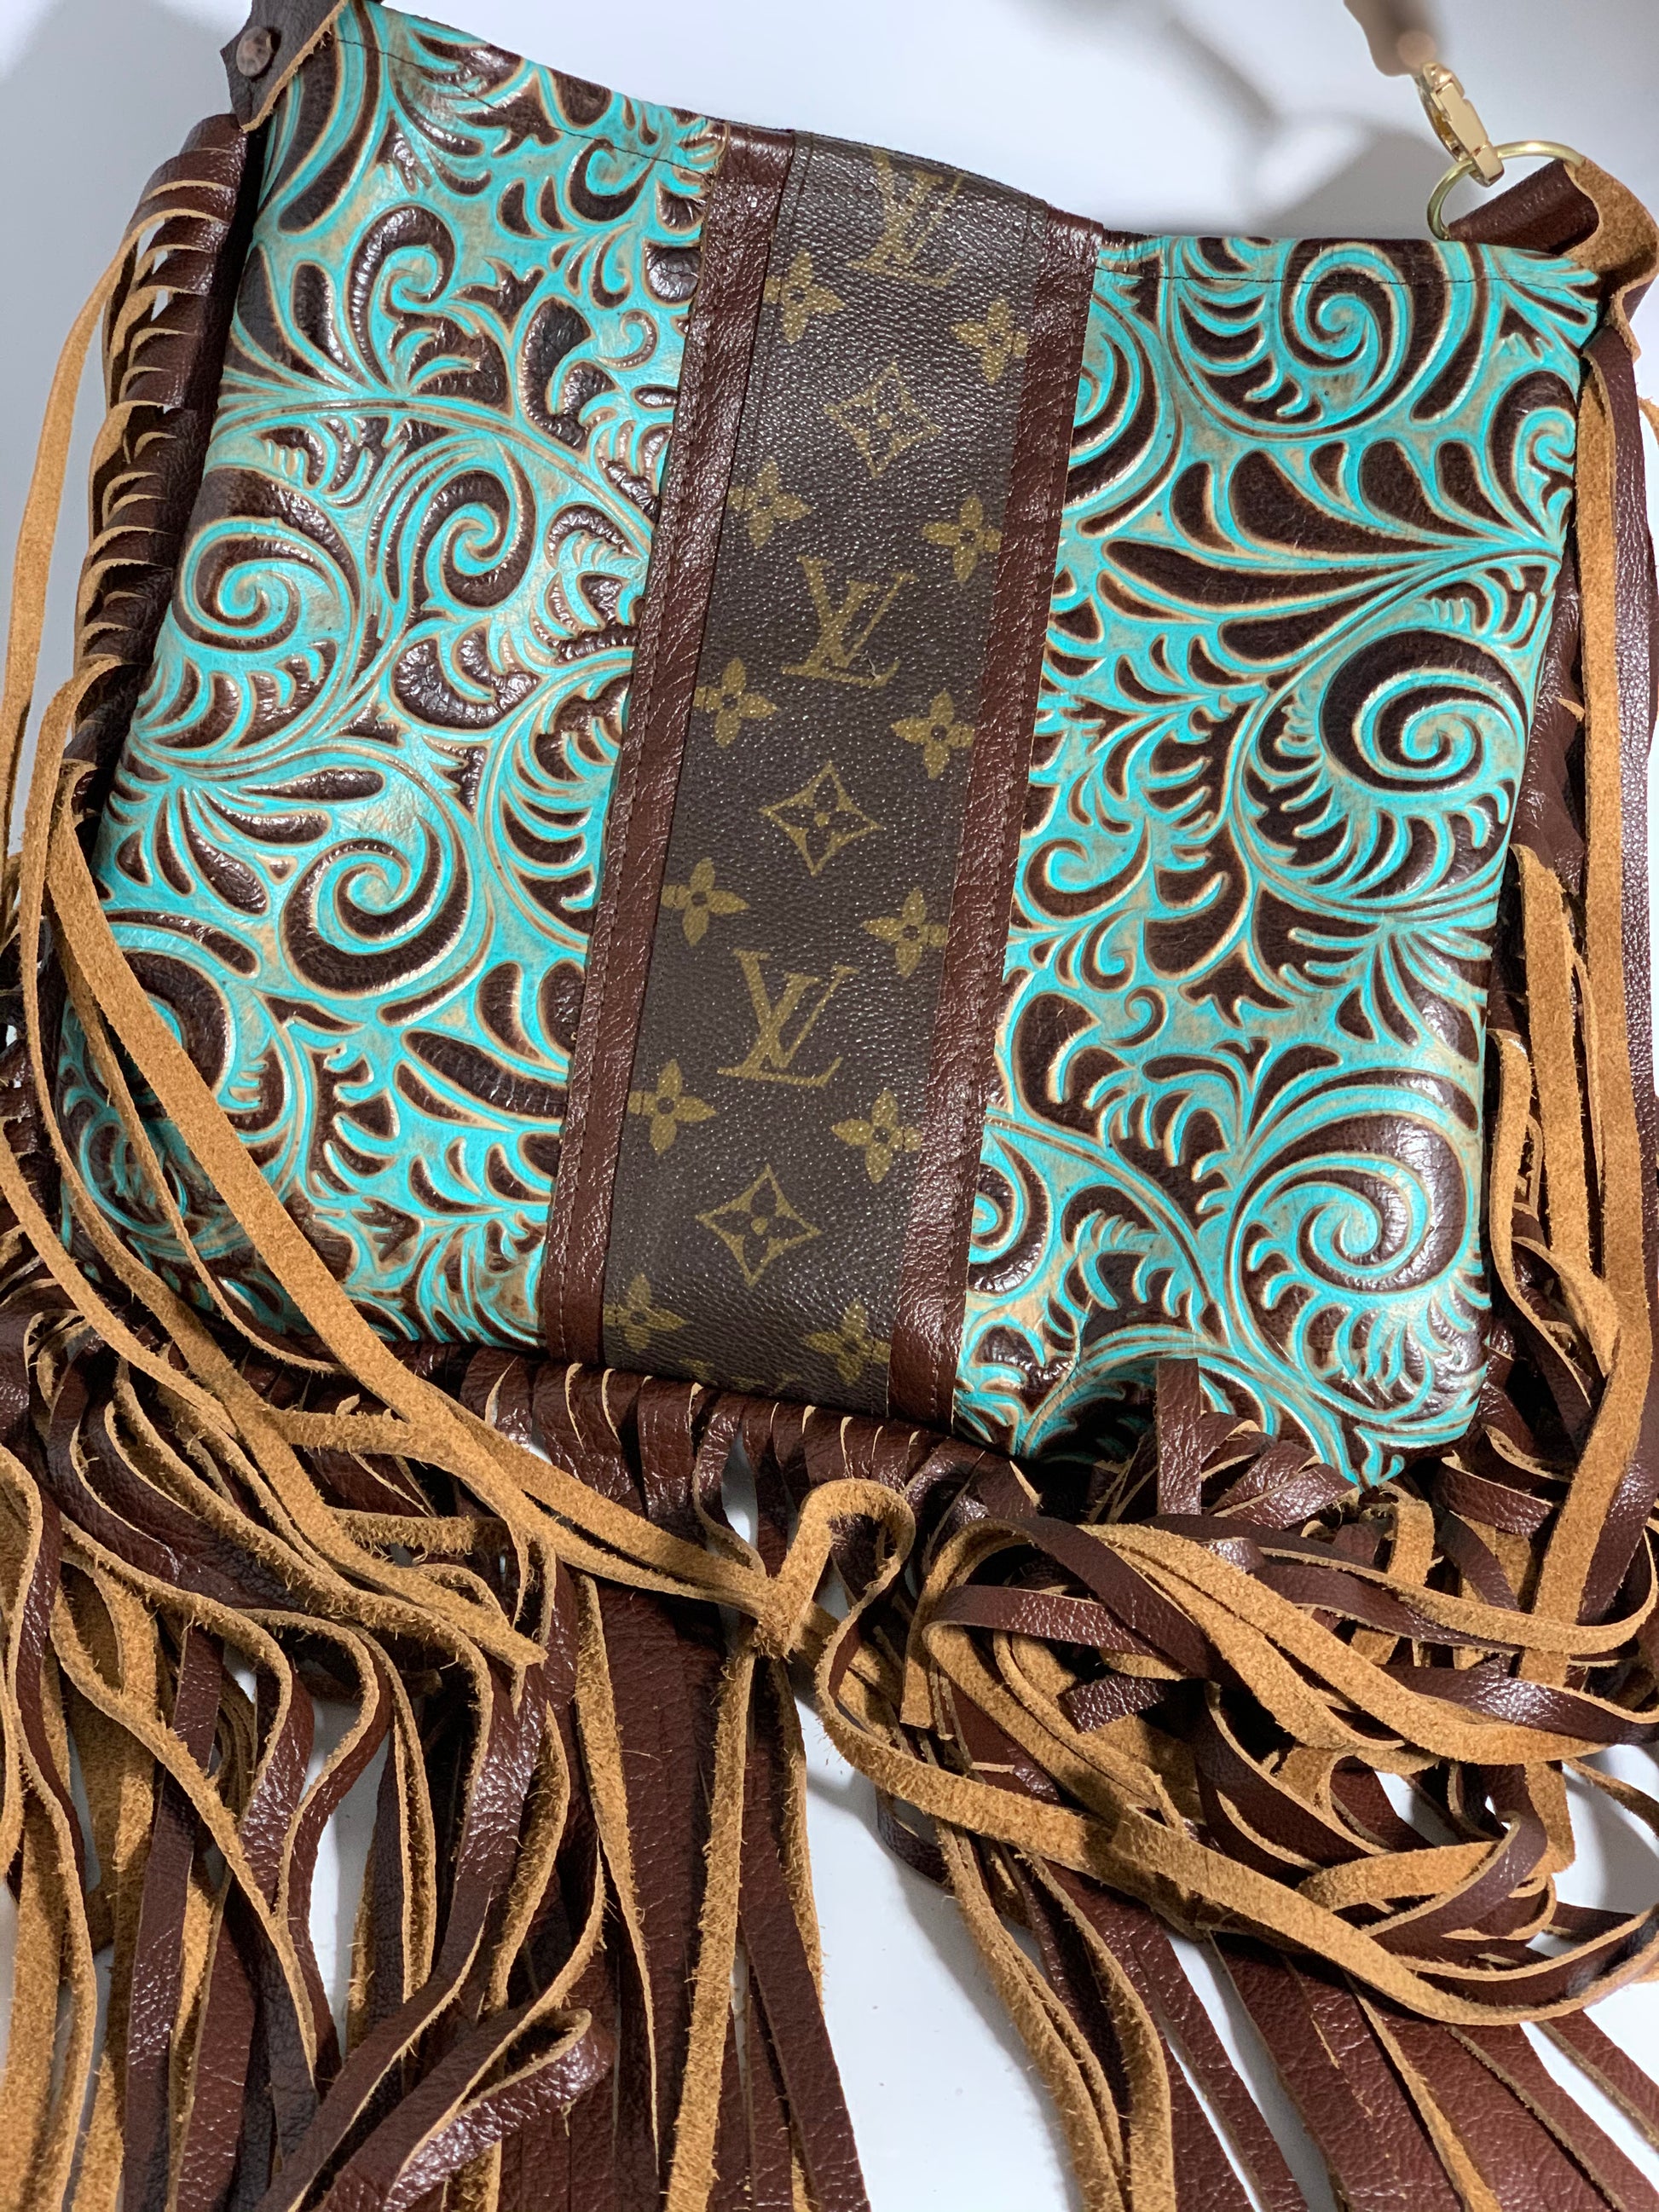 Medium Crossbody - Embossed Ariel Swirl, Brown Strip - Patches Of Upcycling